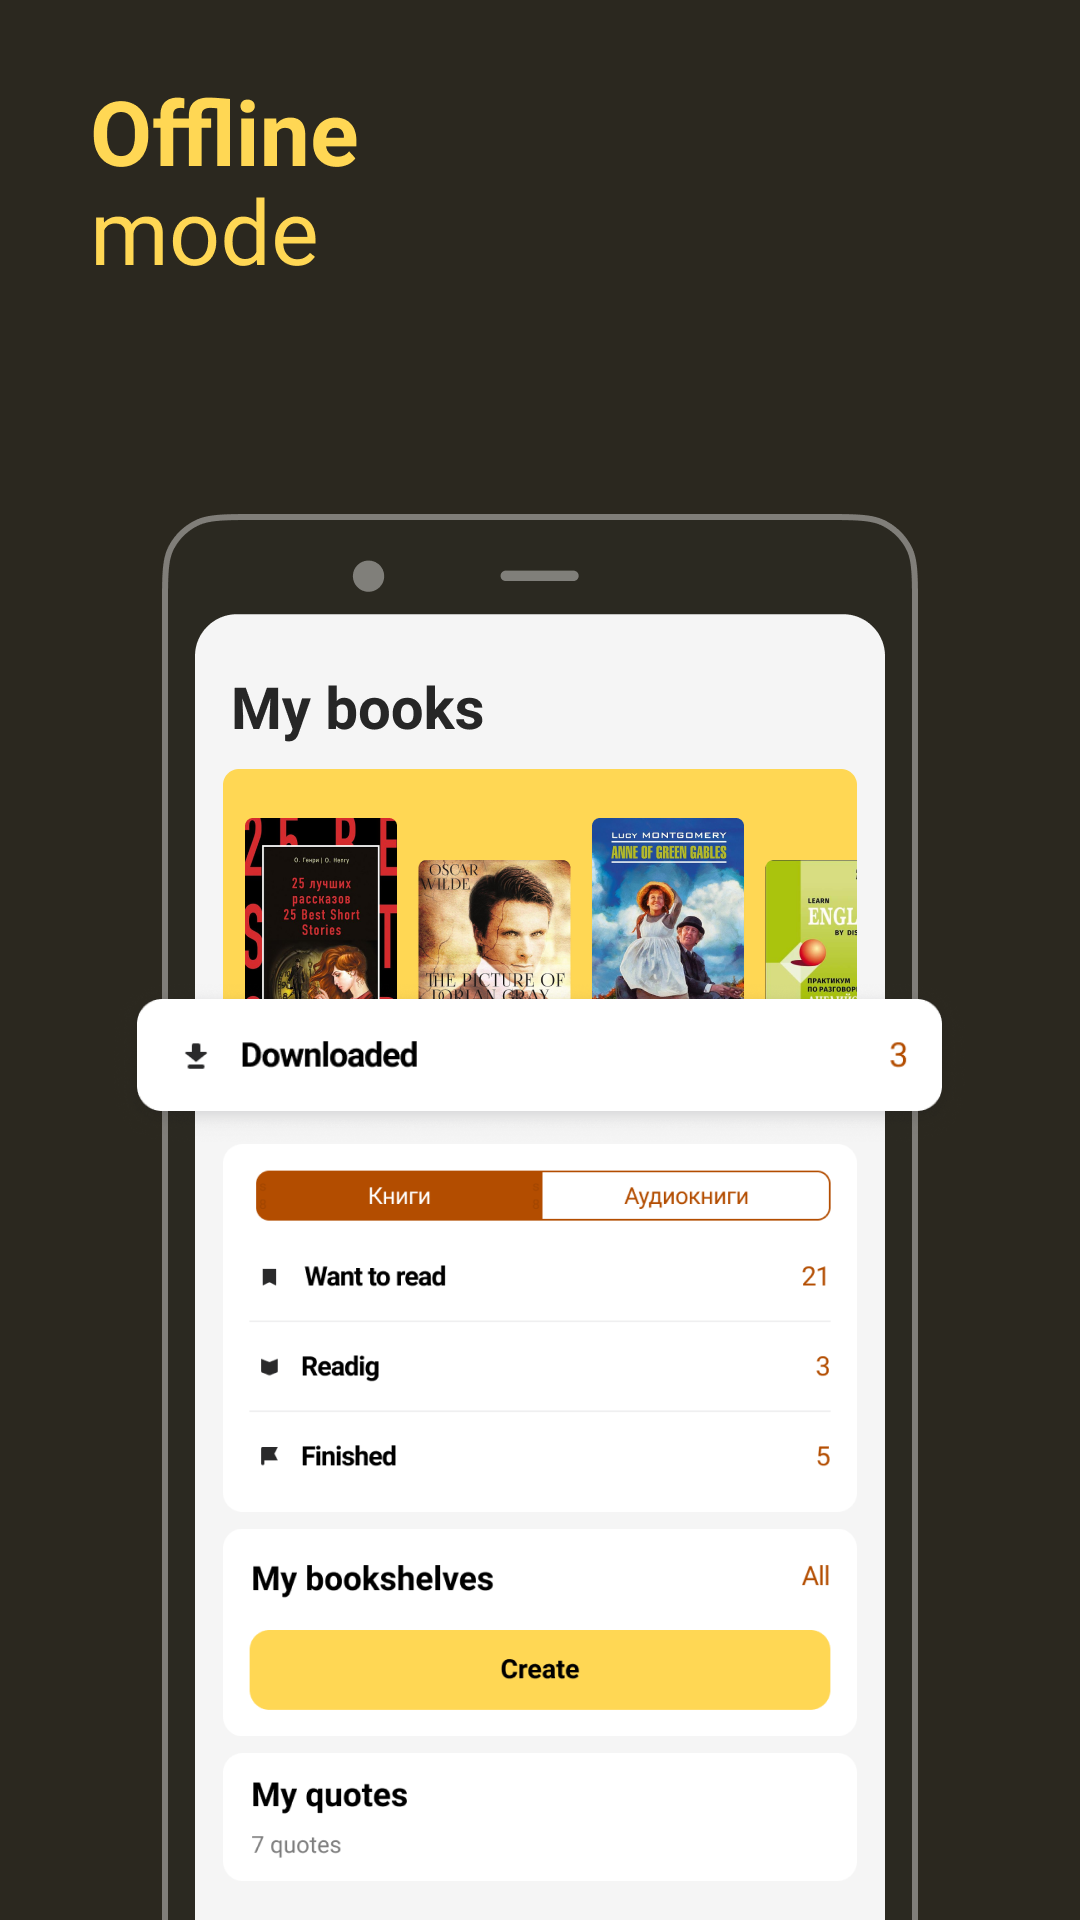 Android application MyBook: books and audiobooks screenshort